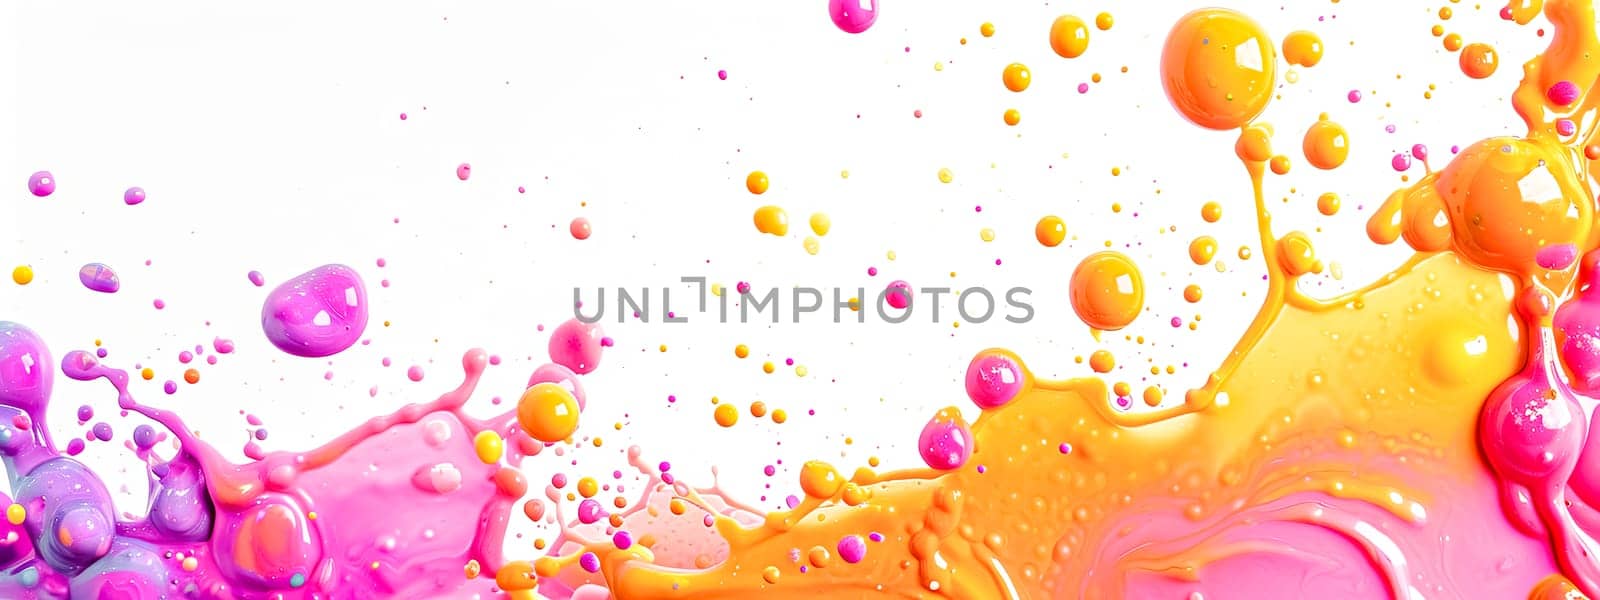 Explosion of pink and orange paint emulsion, vibrant abstract banner by Edophoto